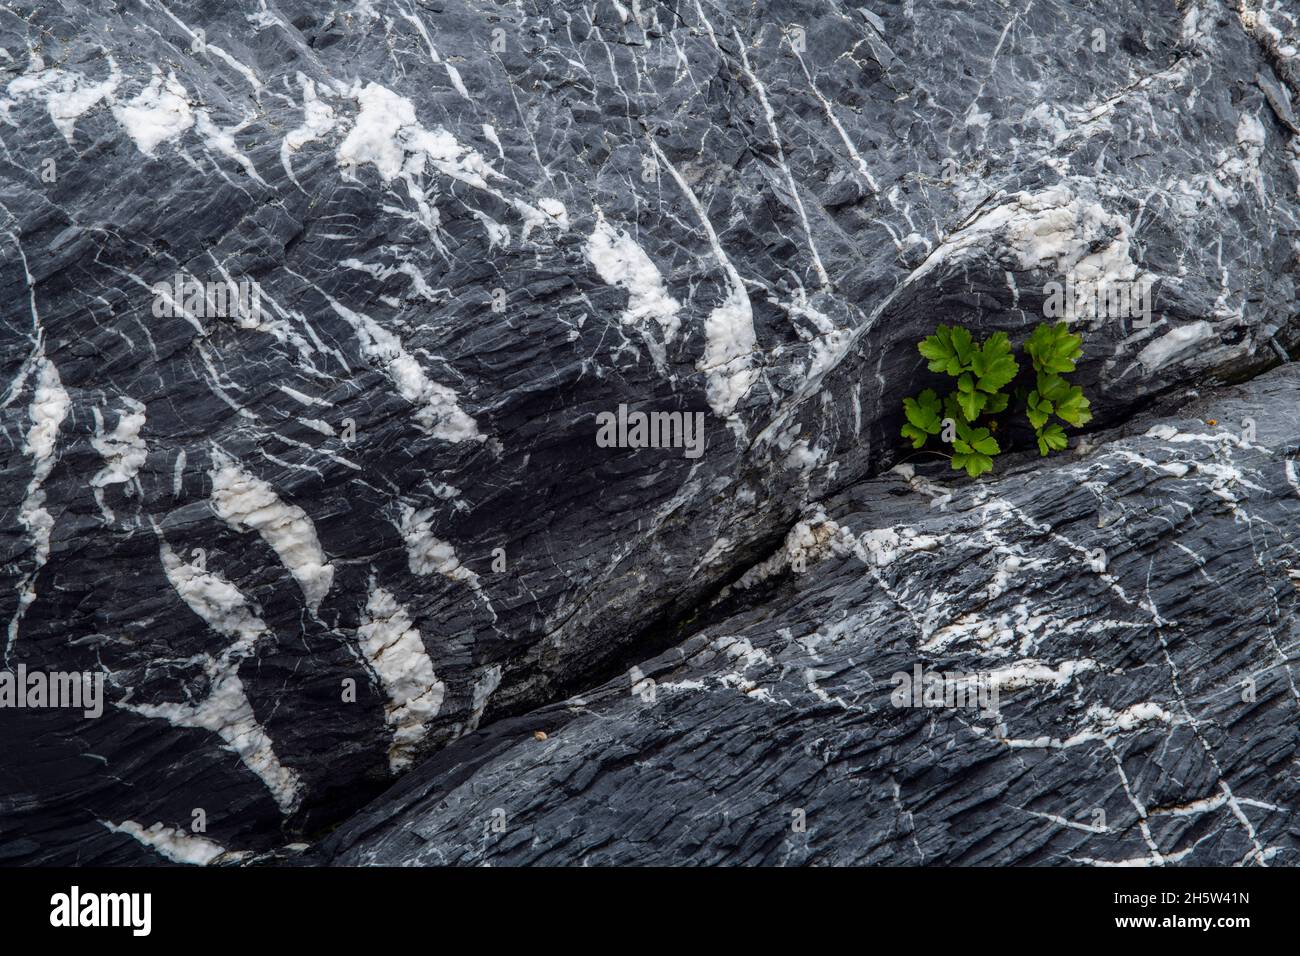 Rock patterns (Quartz and granite) with Beach lovage (Ligusticum scoticum) growing from a crack, St. Lunaire-Griquet, Newfoundland and Labrador NL, Ca Stock Photo